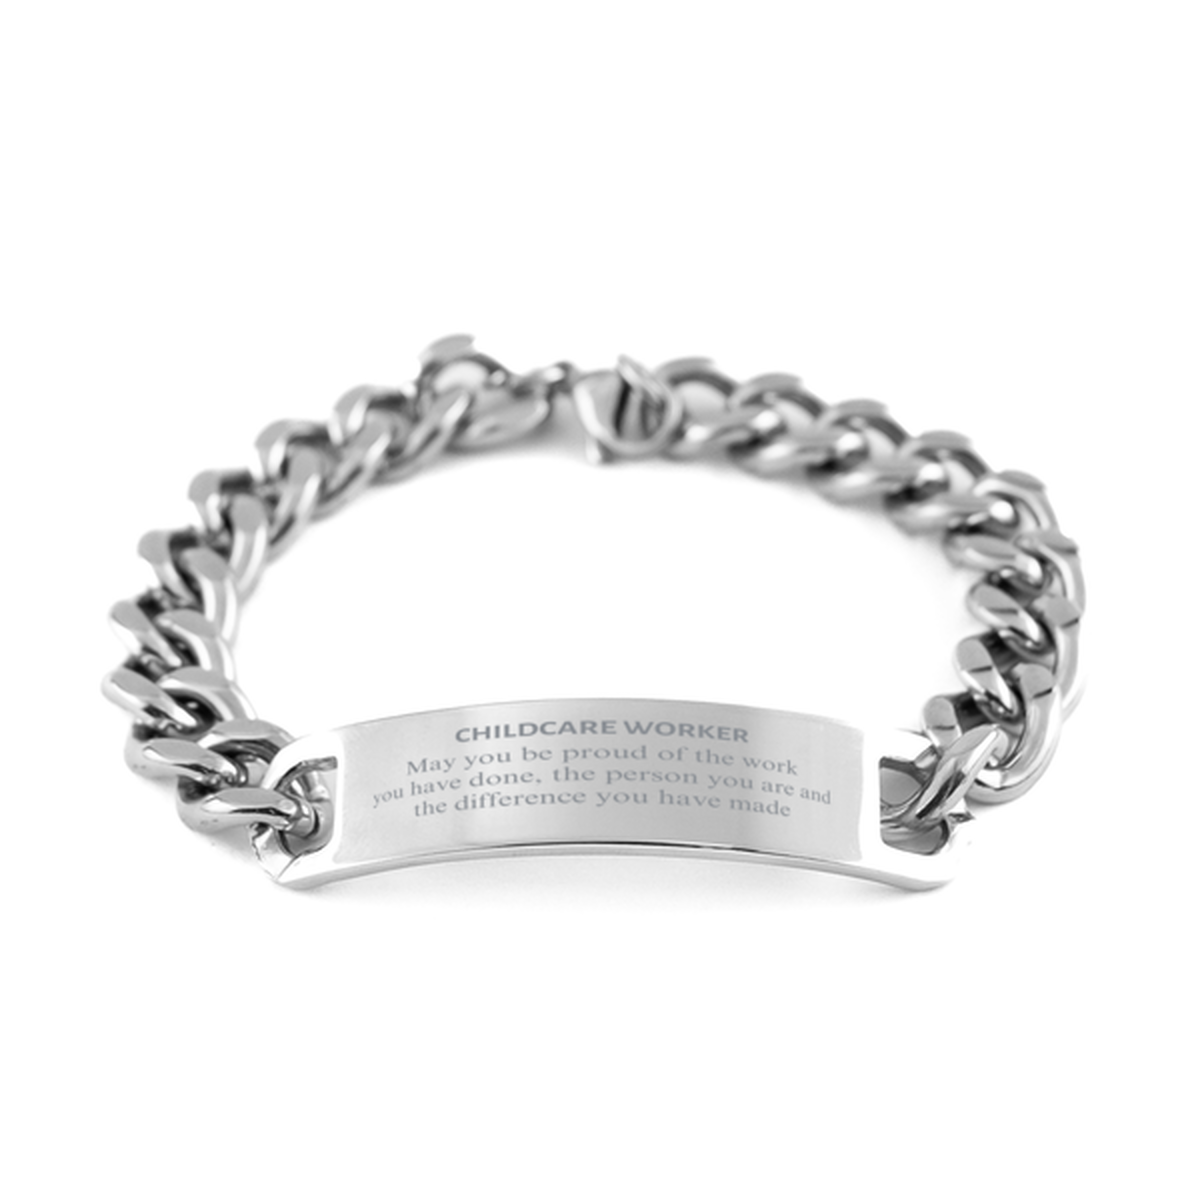 Childcare Worker May you be proud of the work you have done, Retirement Childcare Worker Cuban Chain Stainless Steel Bracelet for Colleague Appreciation Gifts Amazing for Childcare Worker